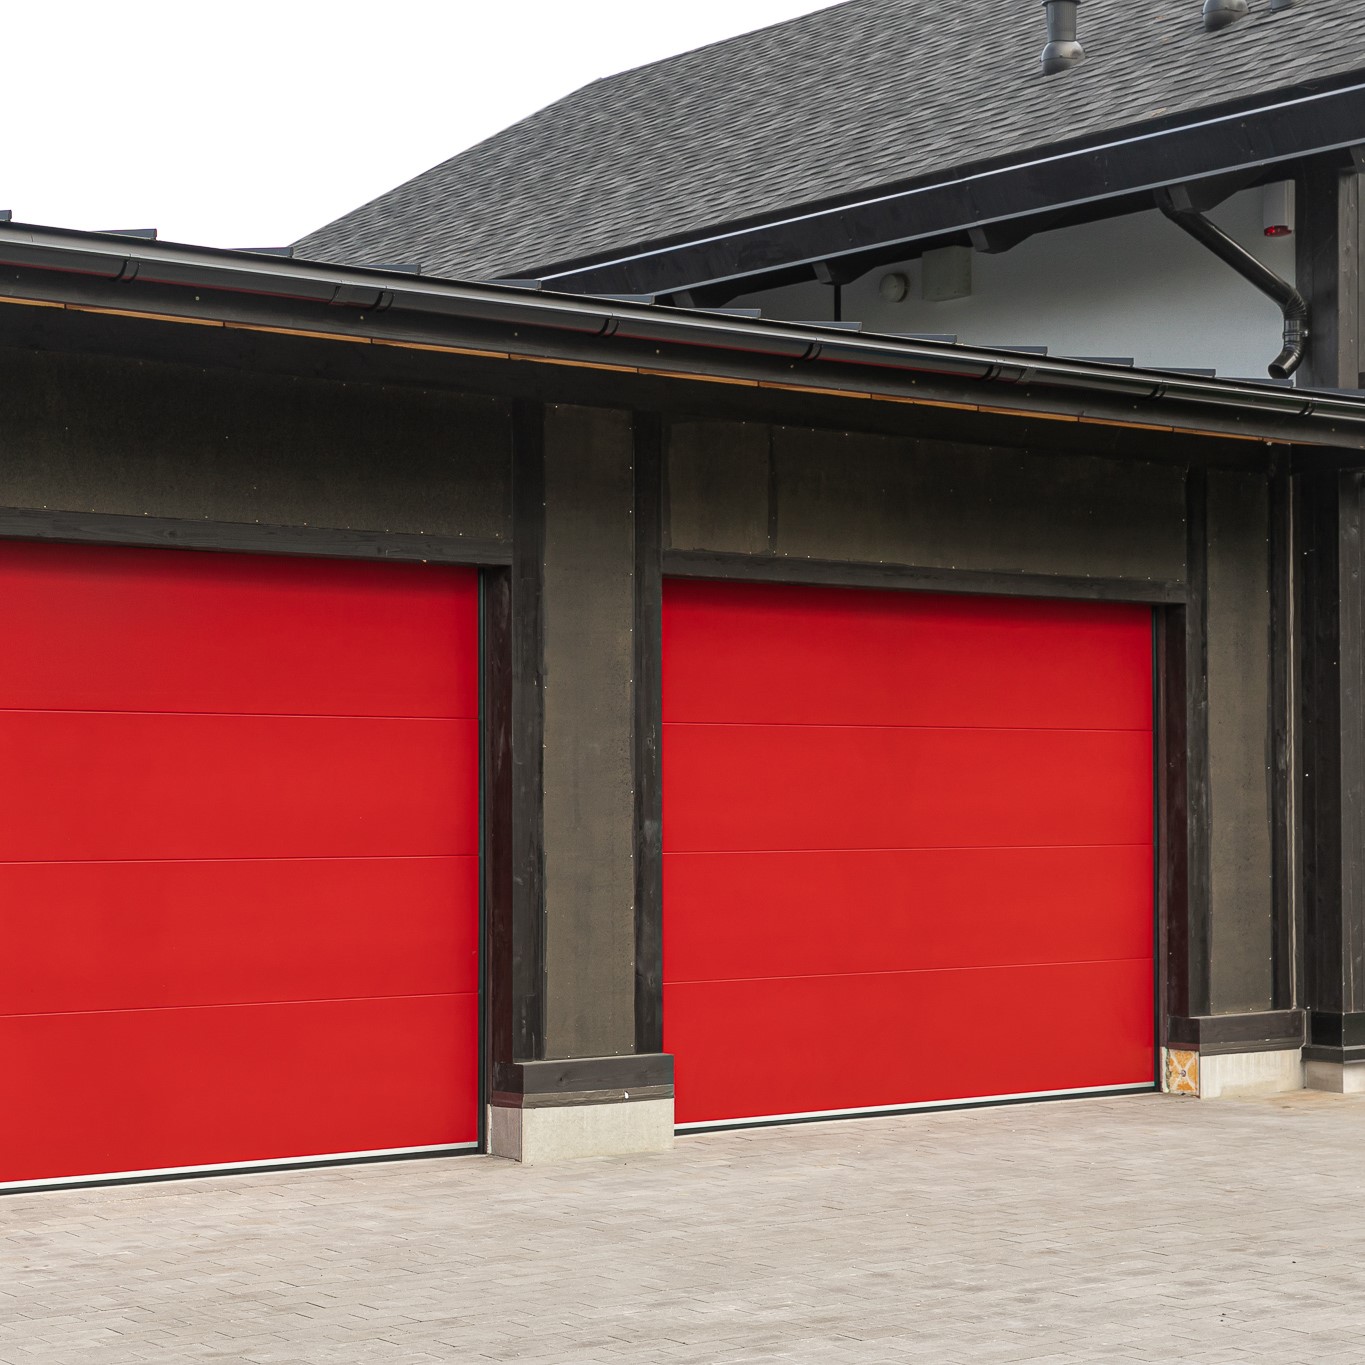 Bright red garage doors with automation